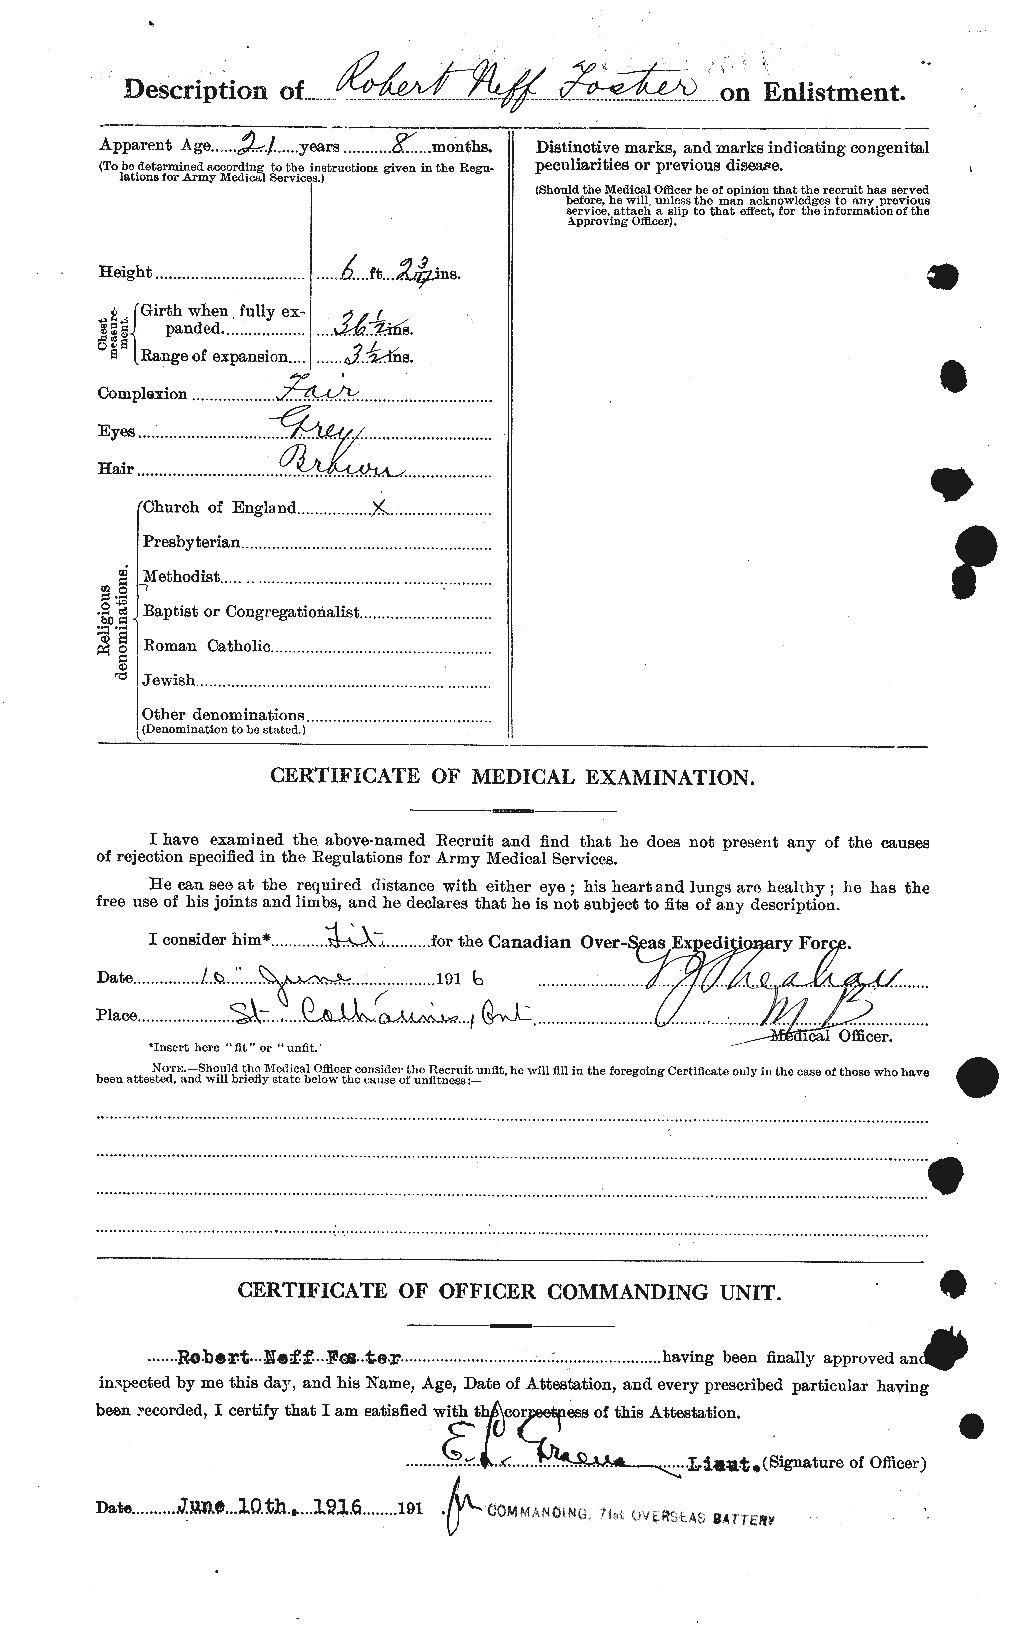 Personnel Records of the First World War - CEF 335182b